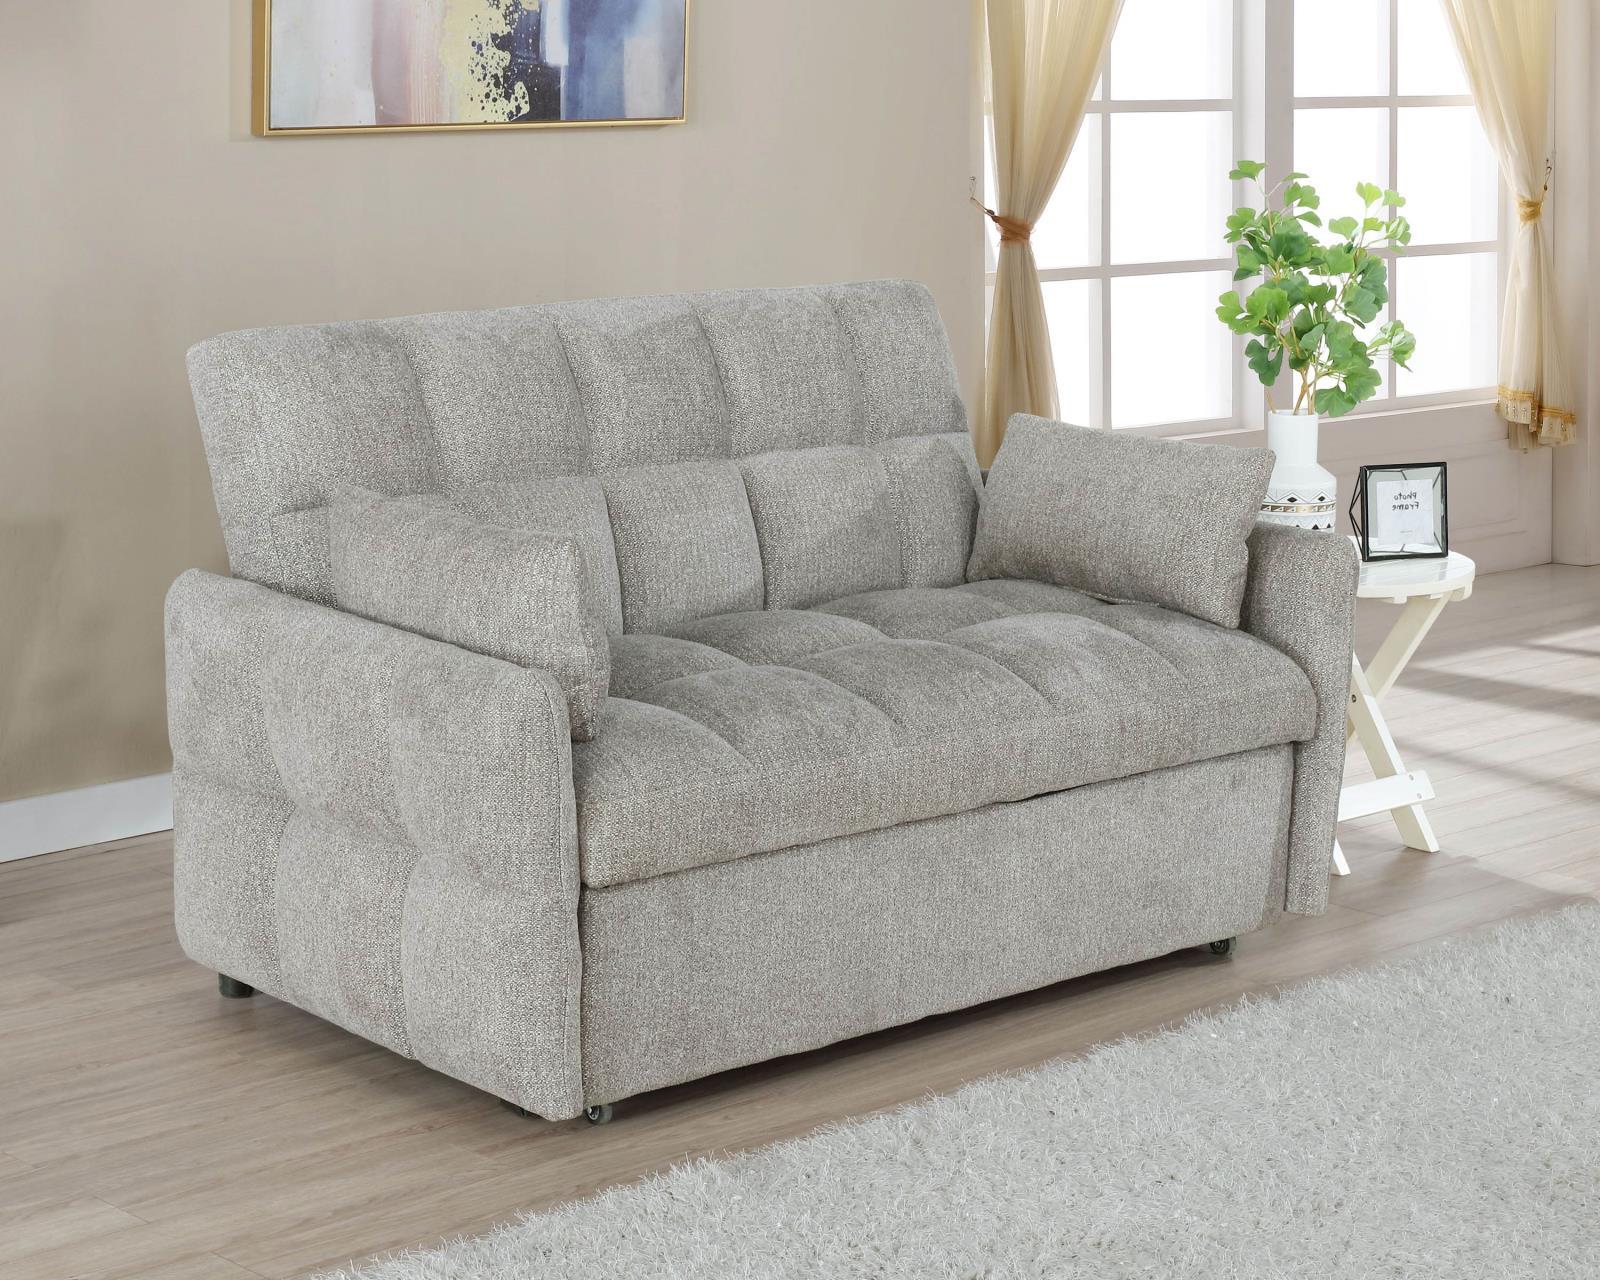 Cotswold Tufted Cushion Sleeper Sofa Bed Light Grey Cotswold Tufted Cushion Sleeper Sofa Bed Light Grey Half Price Furniture